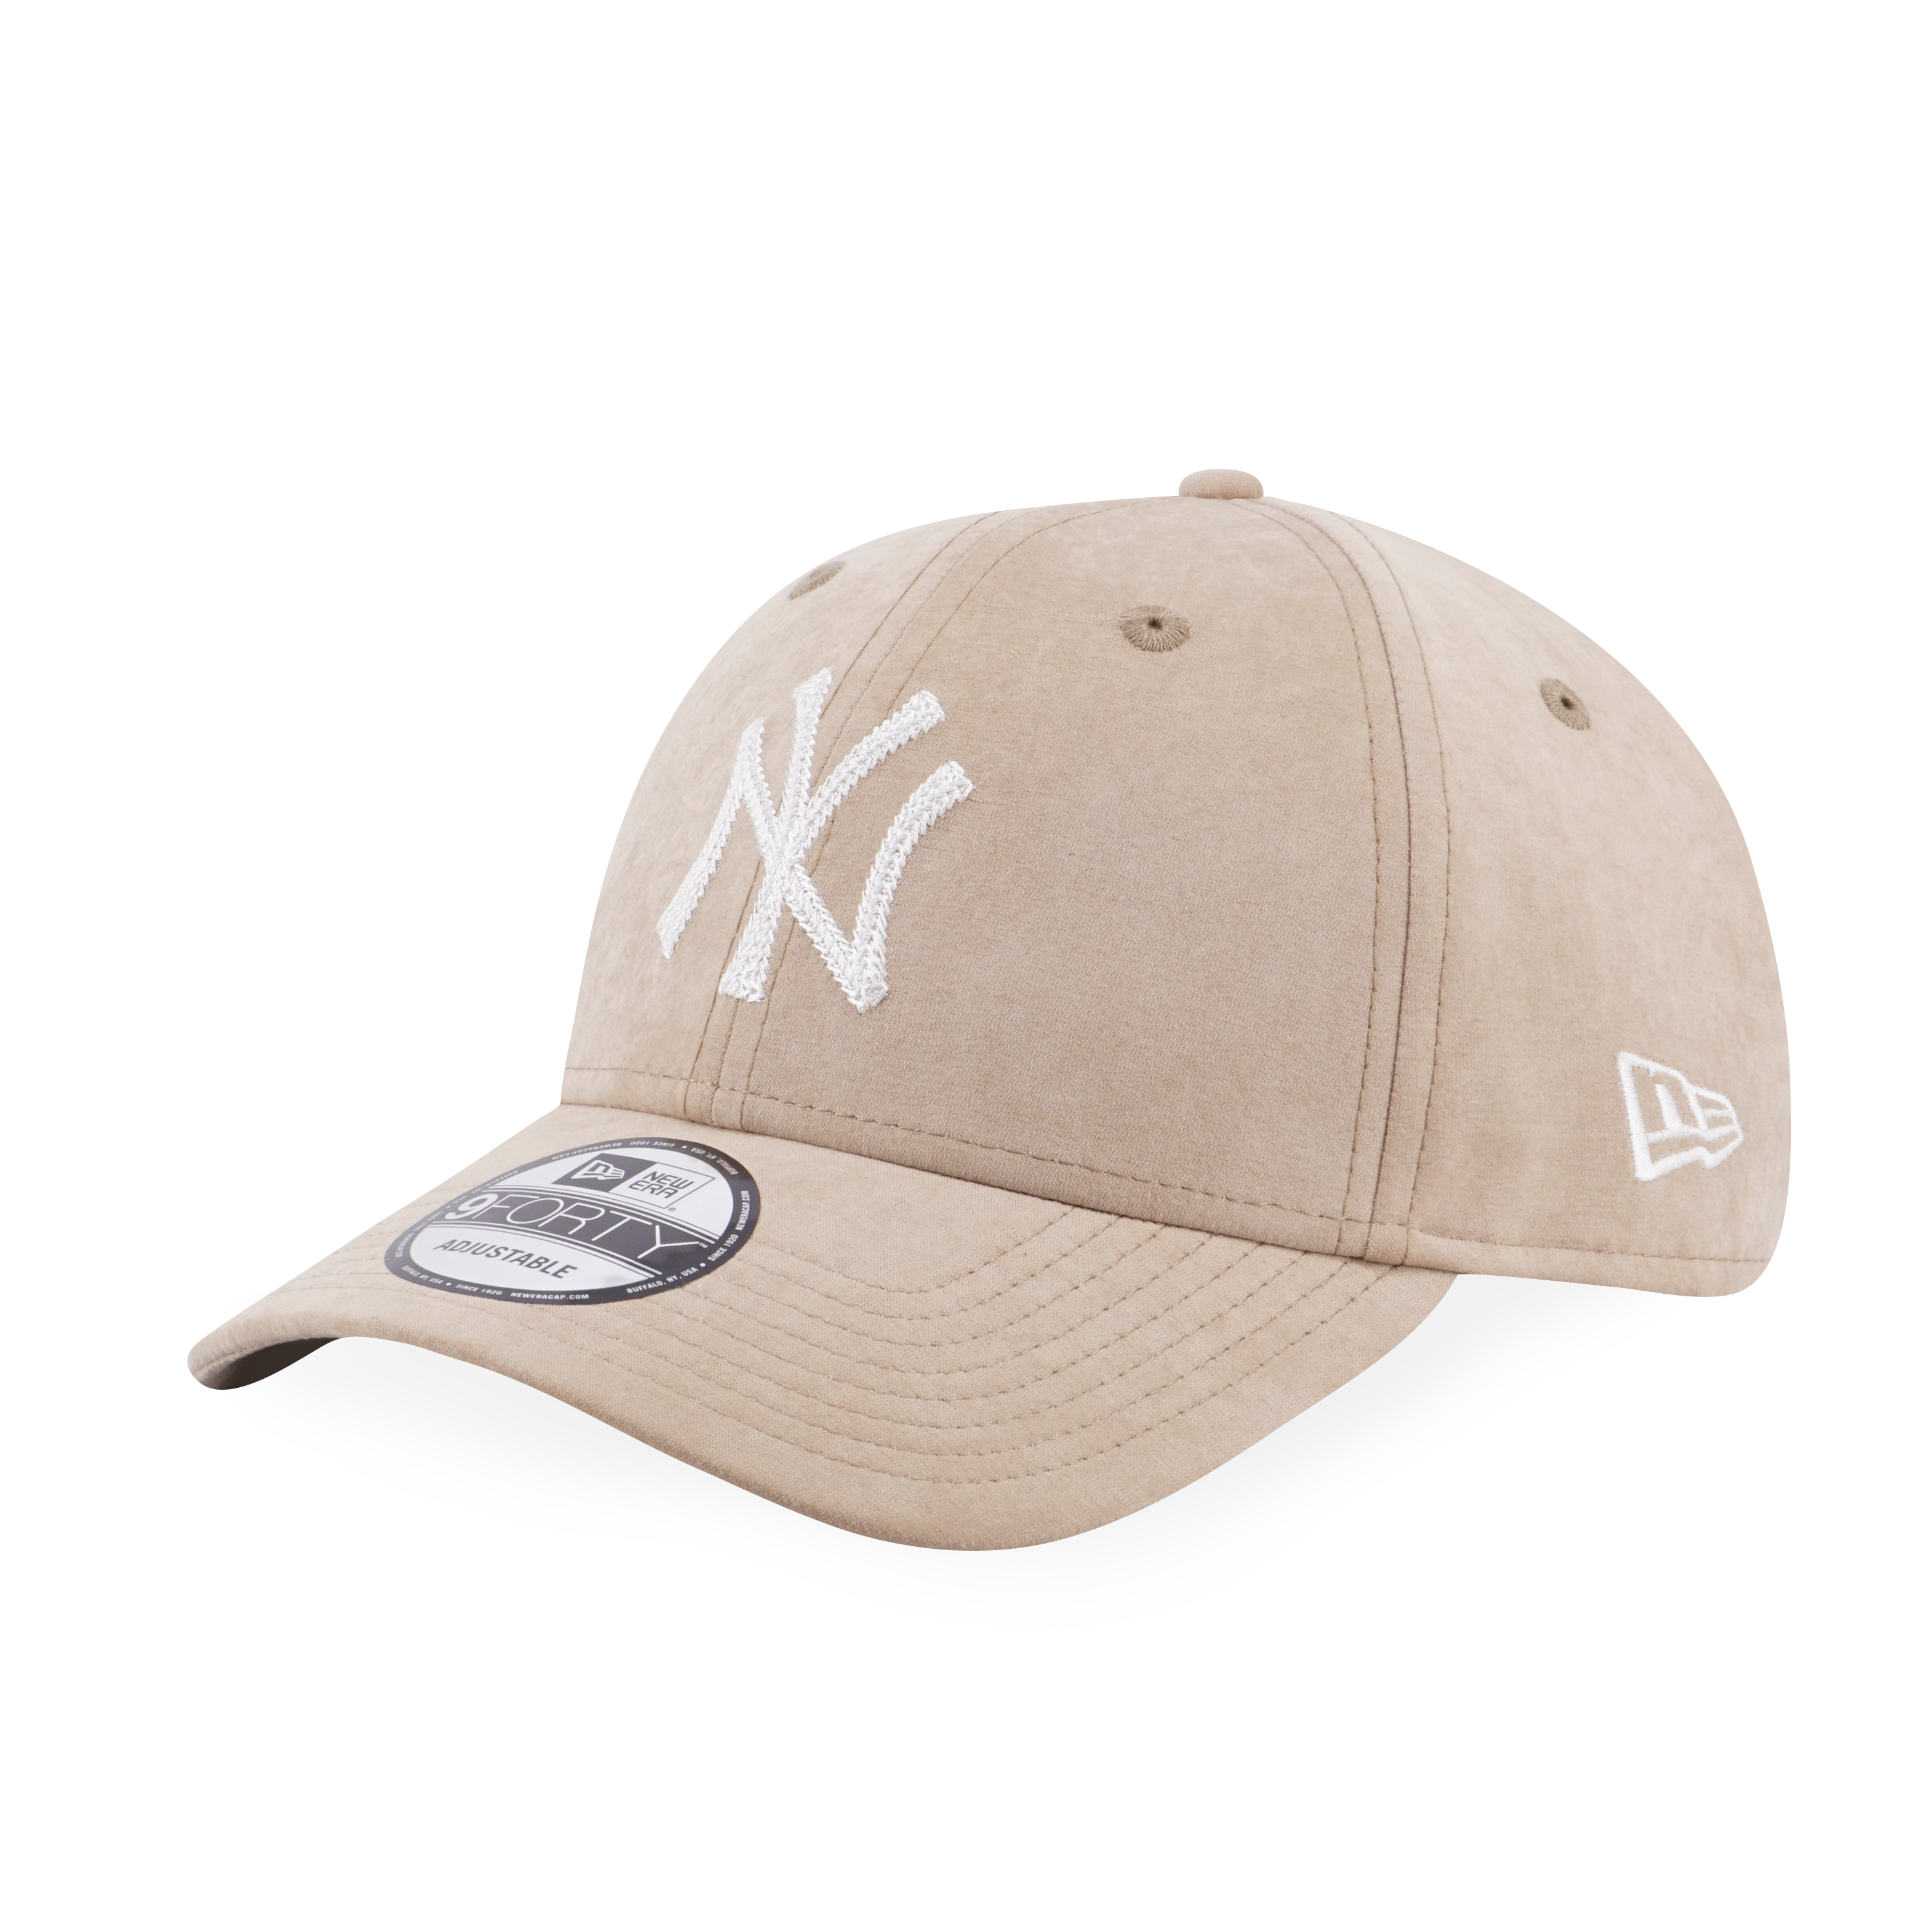 Official Stitches New York Yankees Gear, Stitches Yankees Merchandise,  Stitches Originals and More